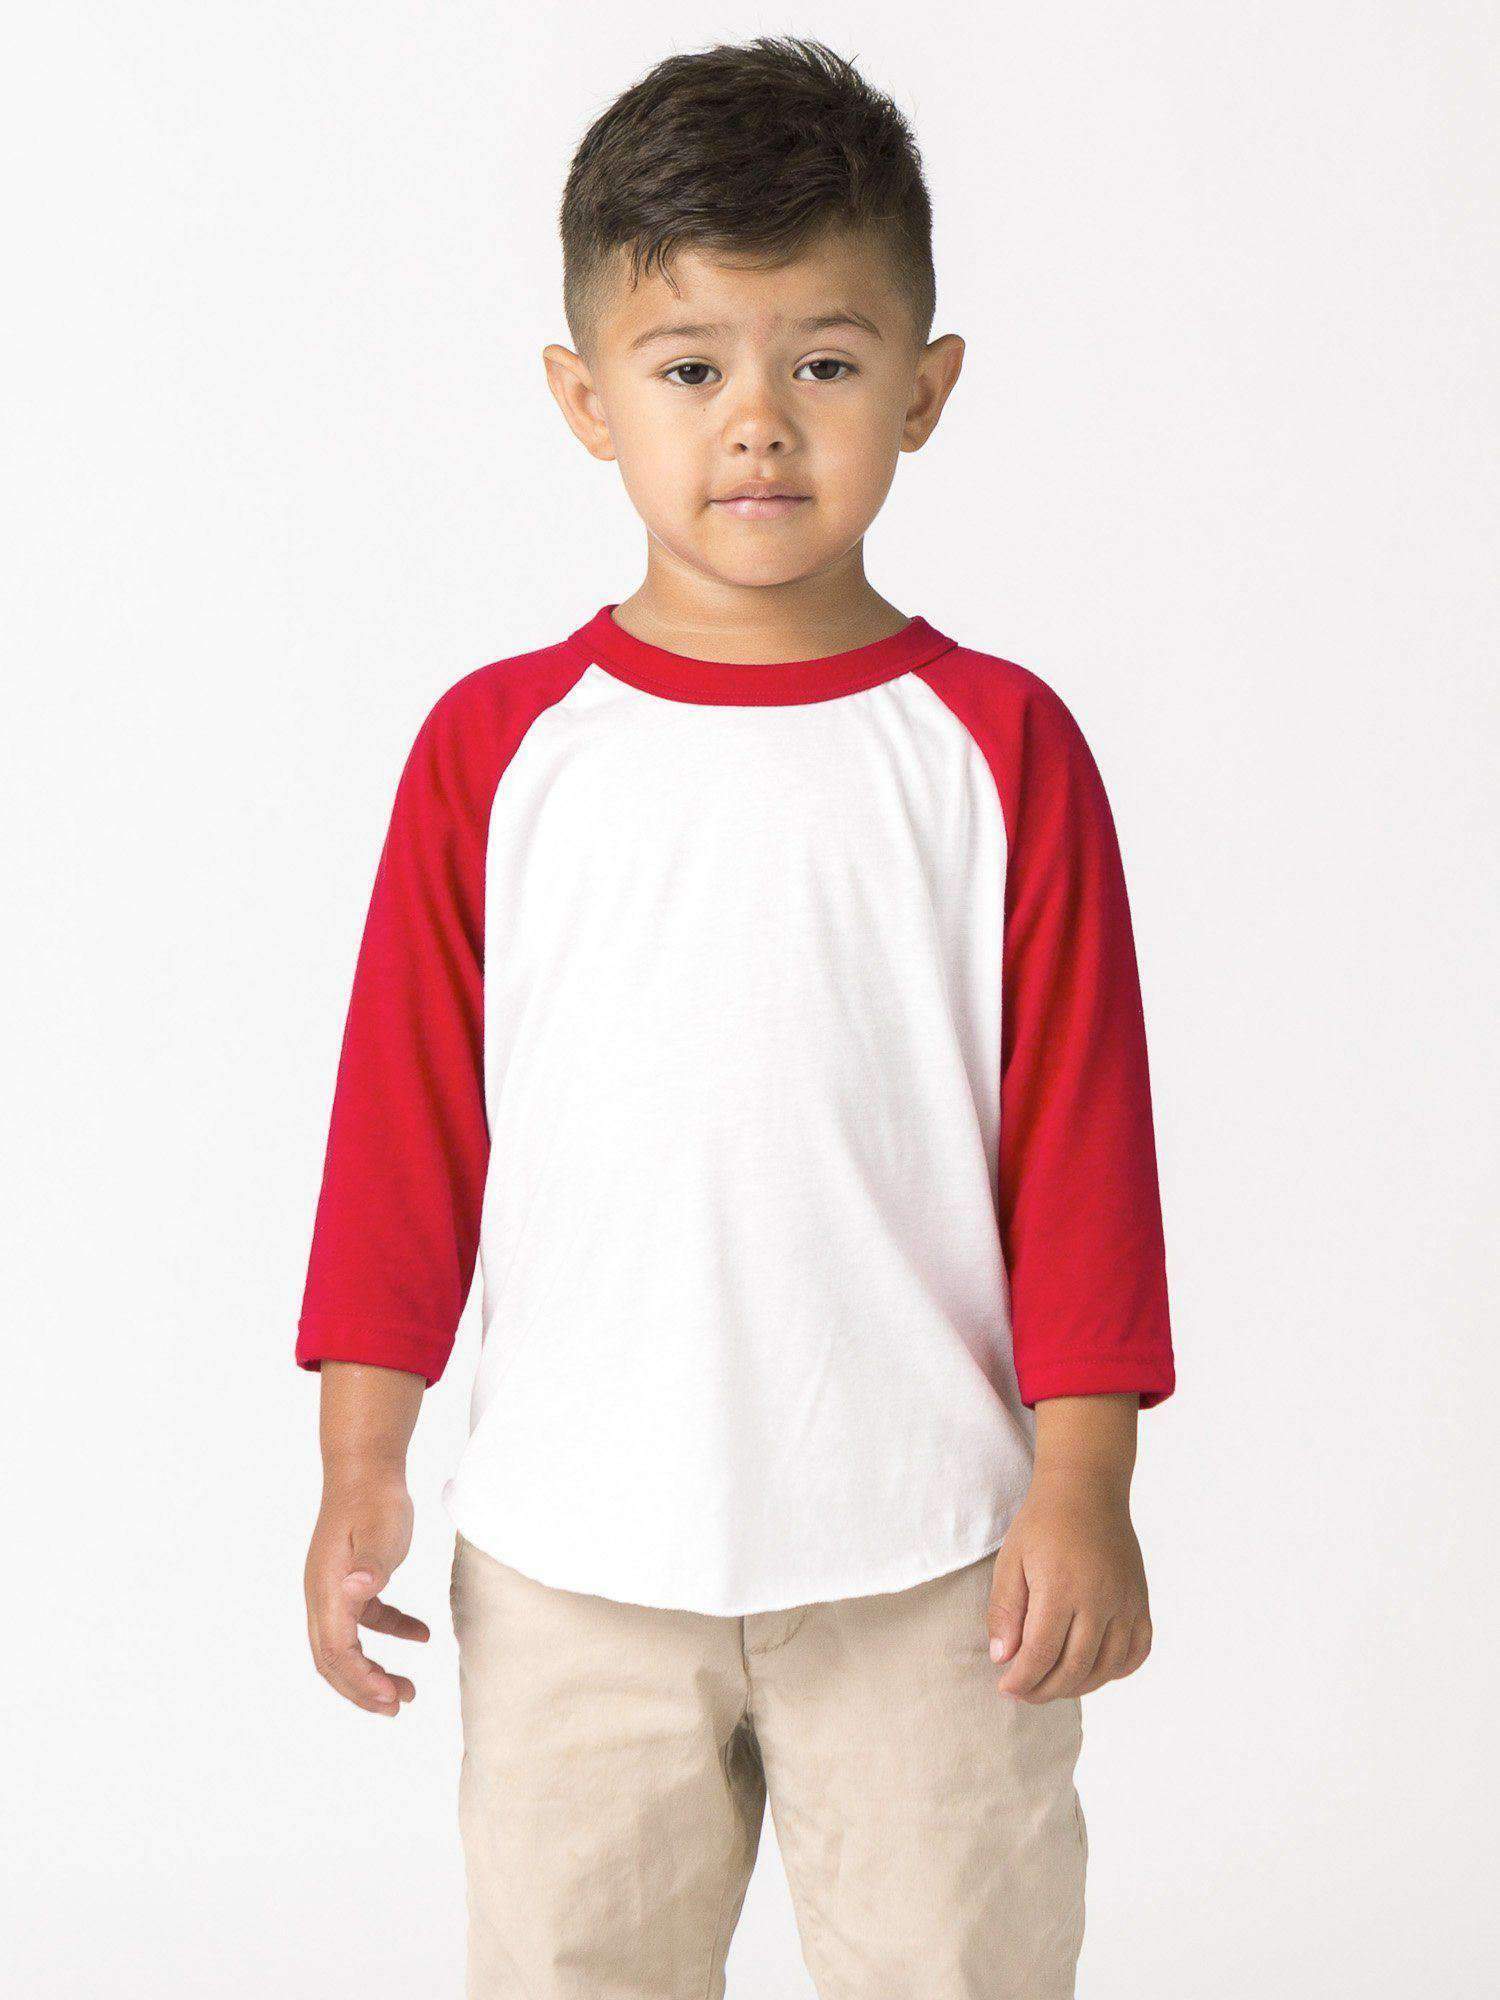 FF1053 - Toddler 3/4 Sleeve Poly Cotton Raglan Kids Los Angeles Apparel White/Red 2 